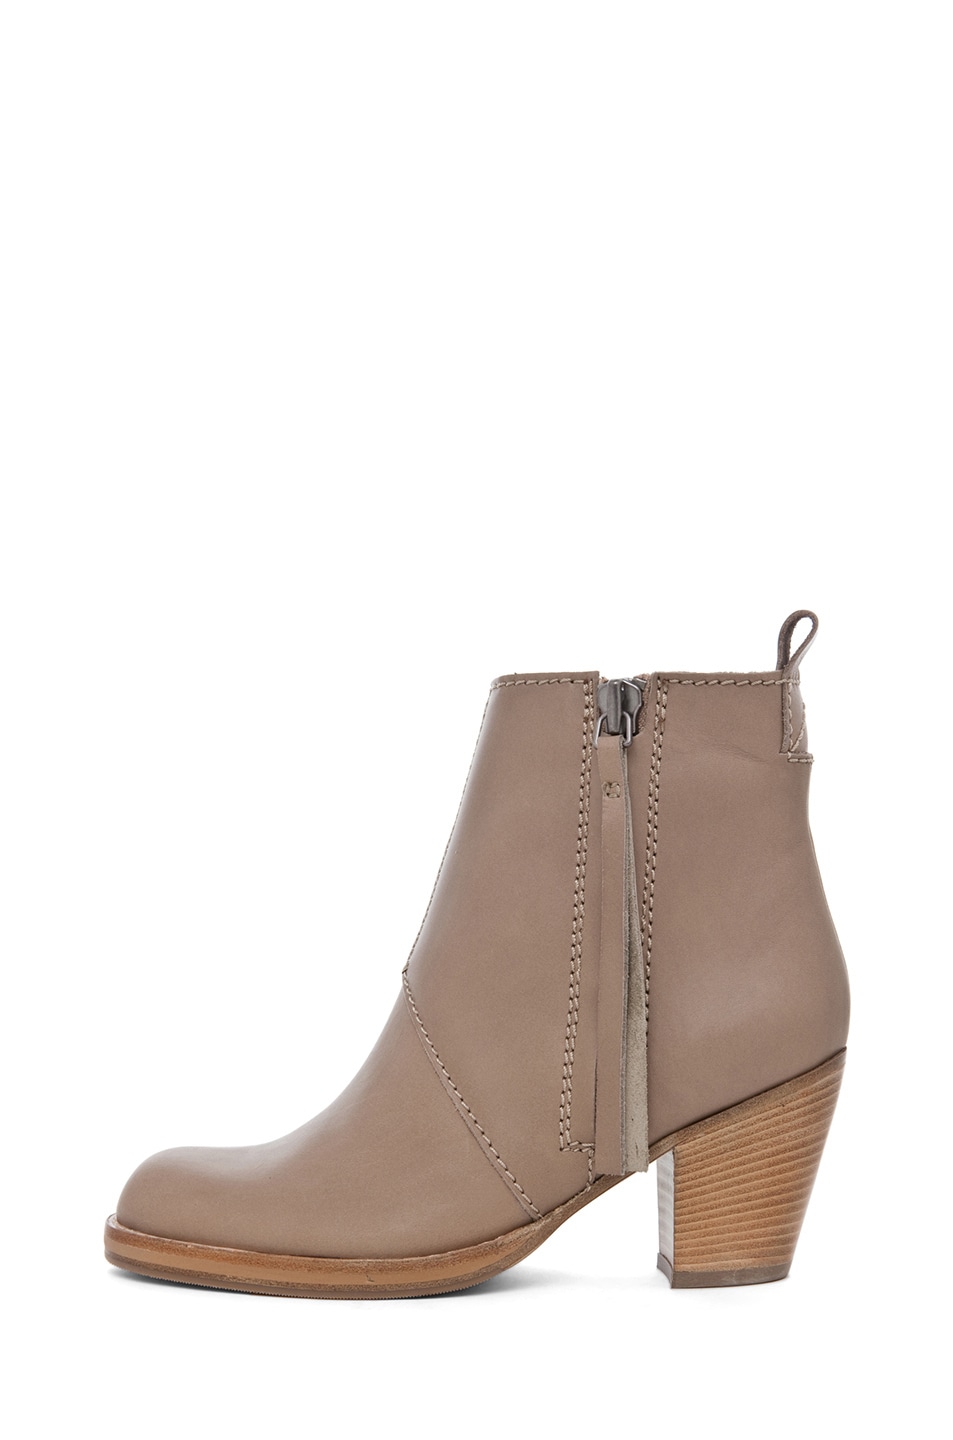 Image 1 of Acne Studios Pistol Leather Bootie in Coffee